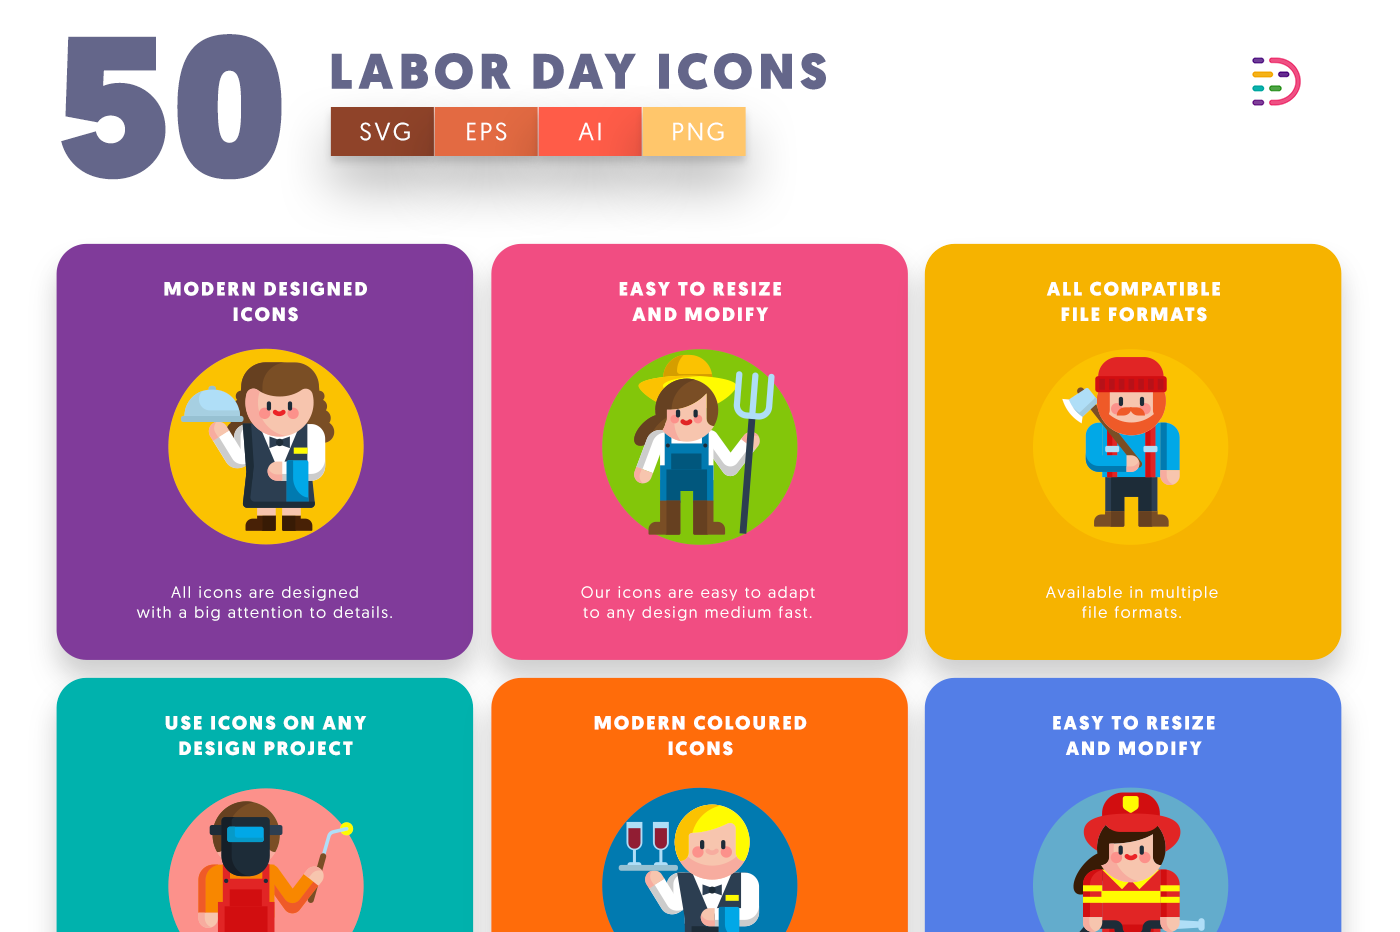 Labor Day Icons with colored backgrounds